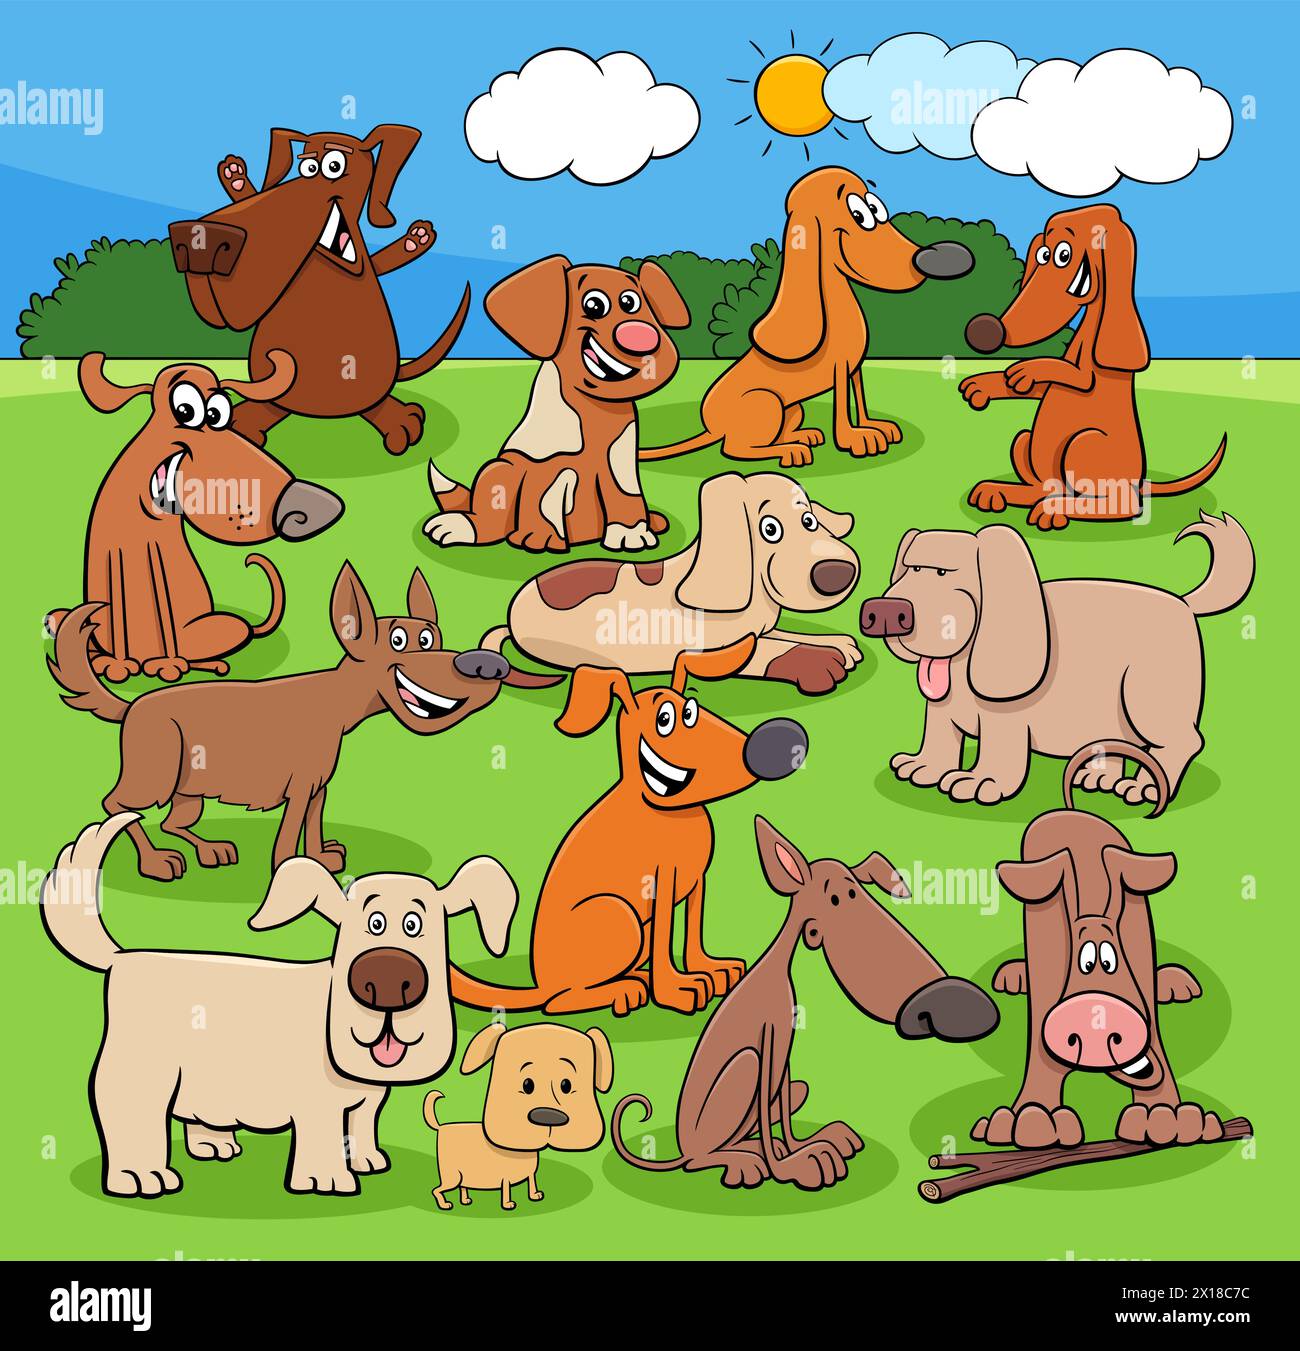 Cartoon illustration of playful dogs or puppies animal characters group in the meadow Stock Vector